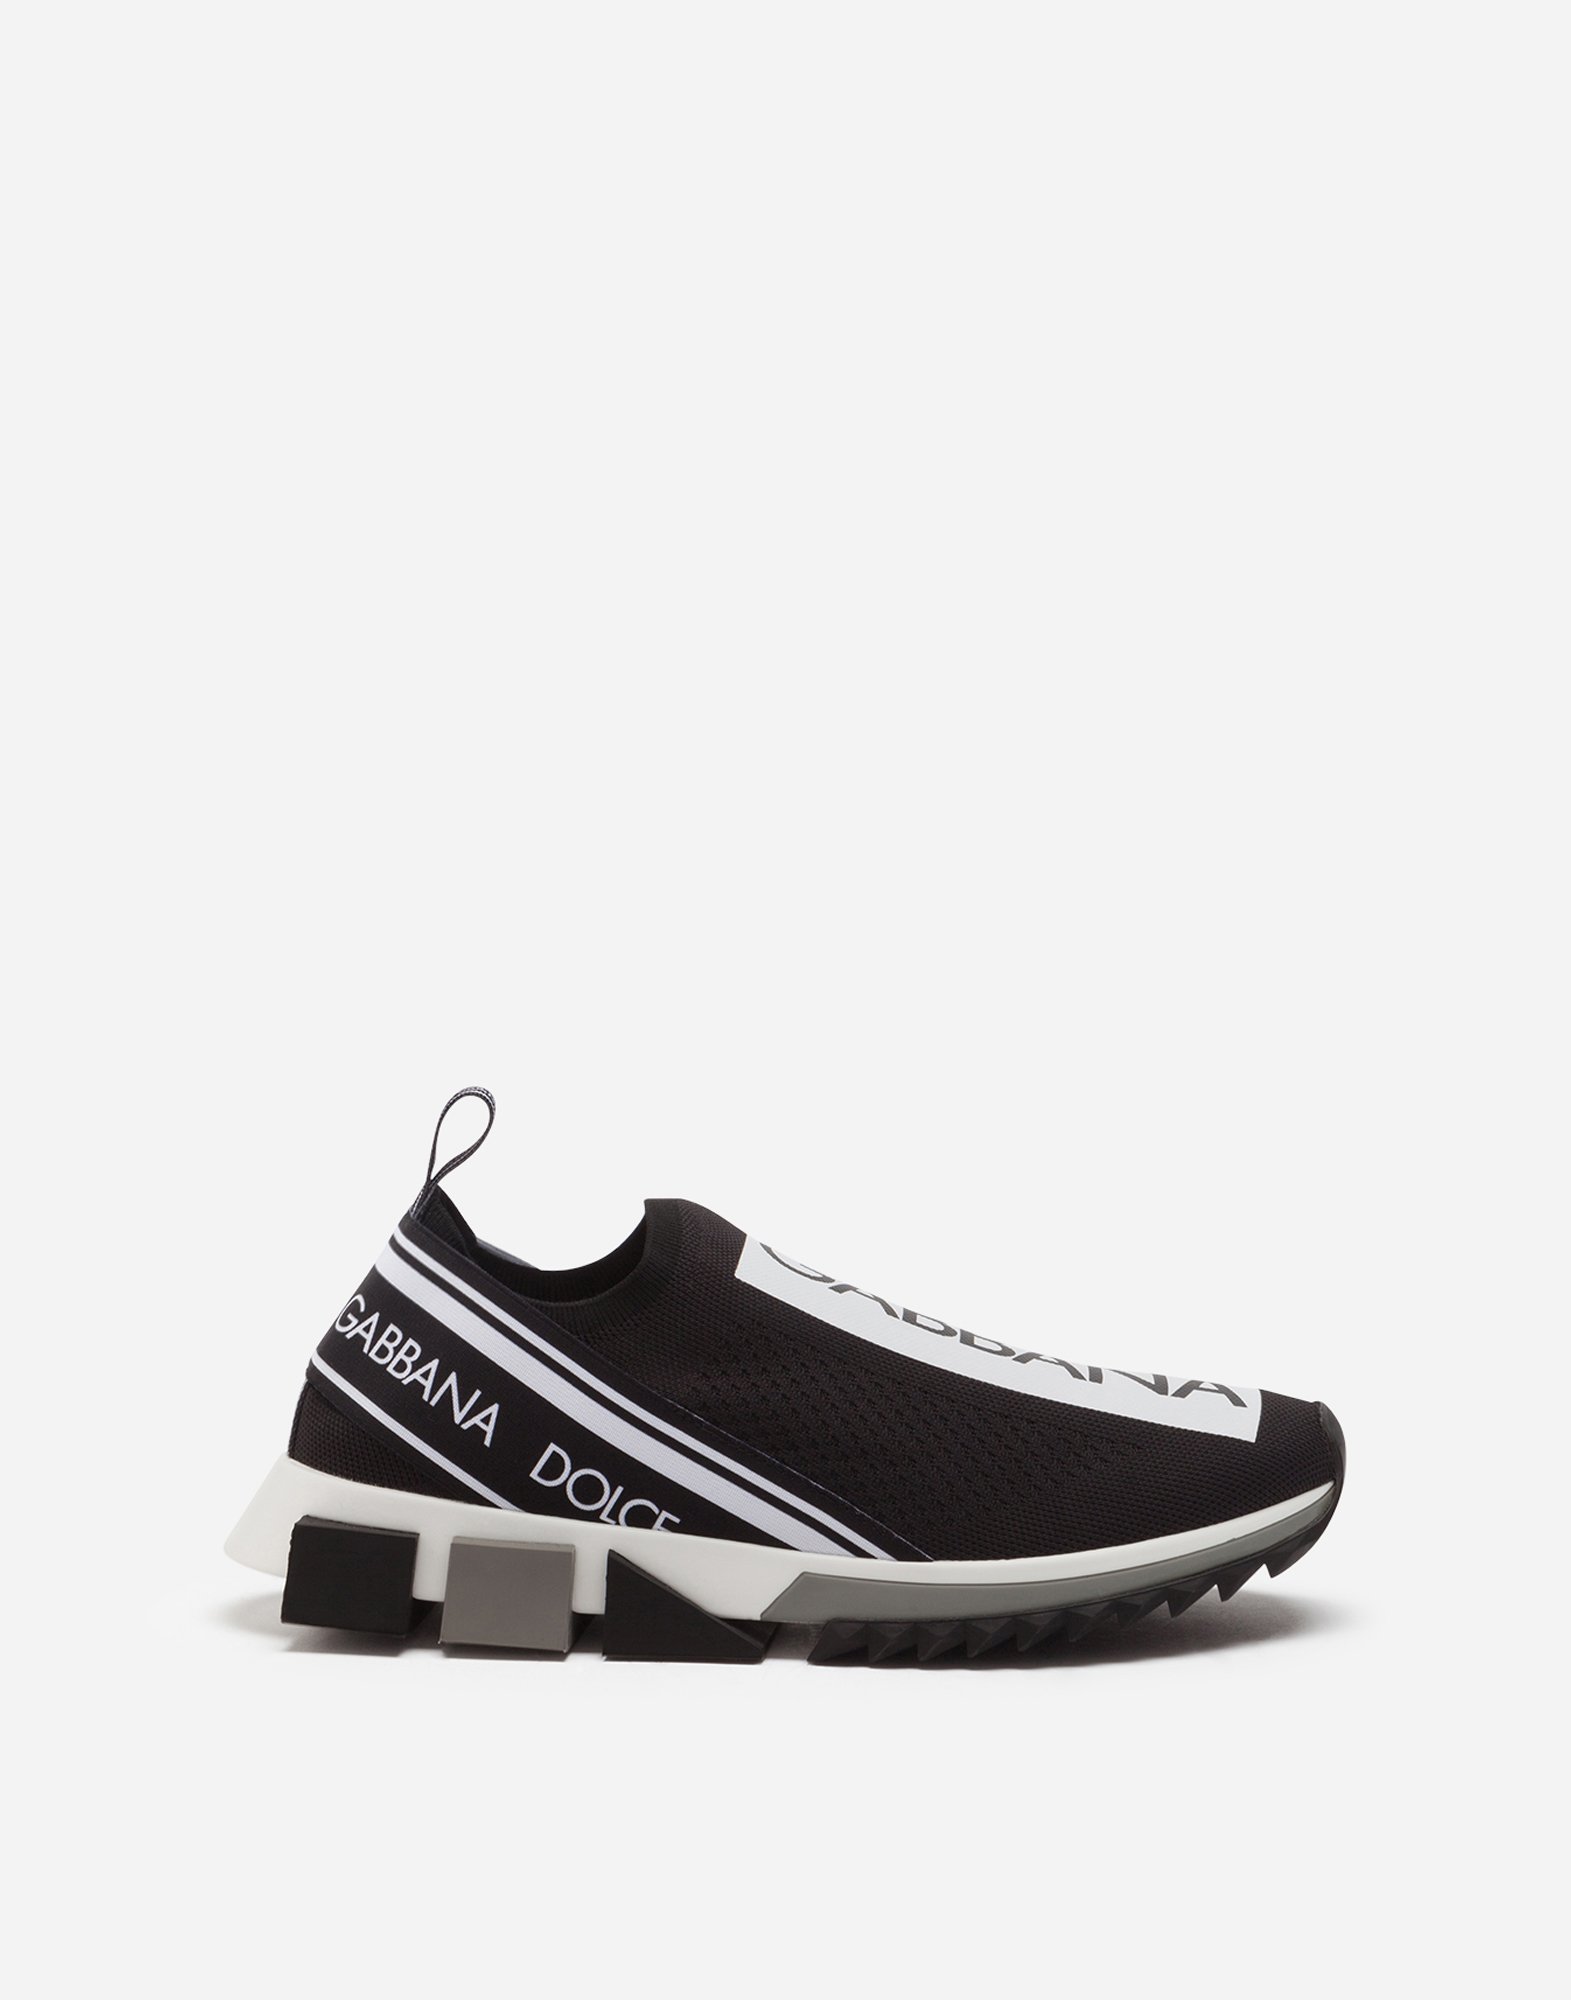 dolce mens sneakers